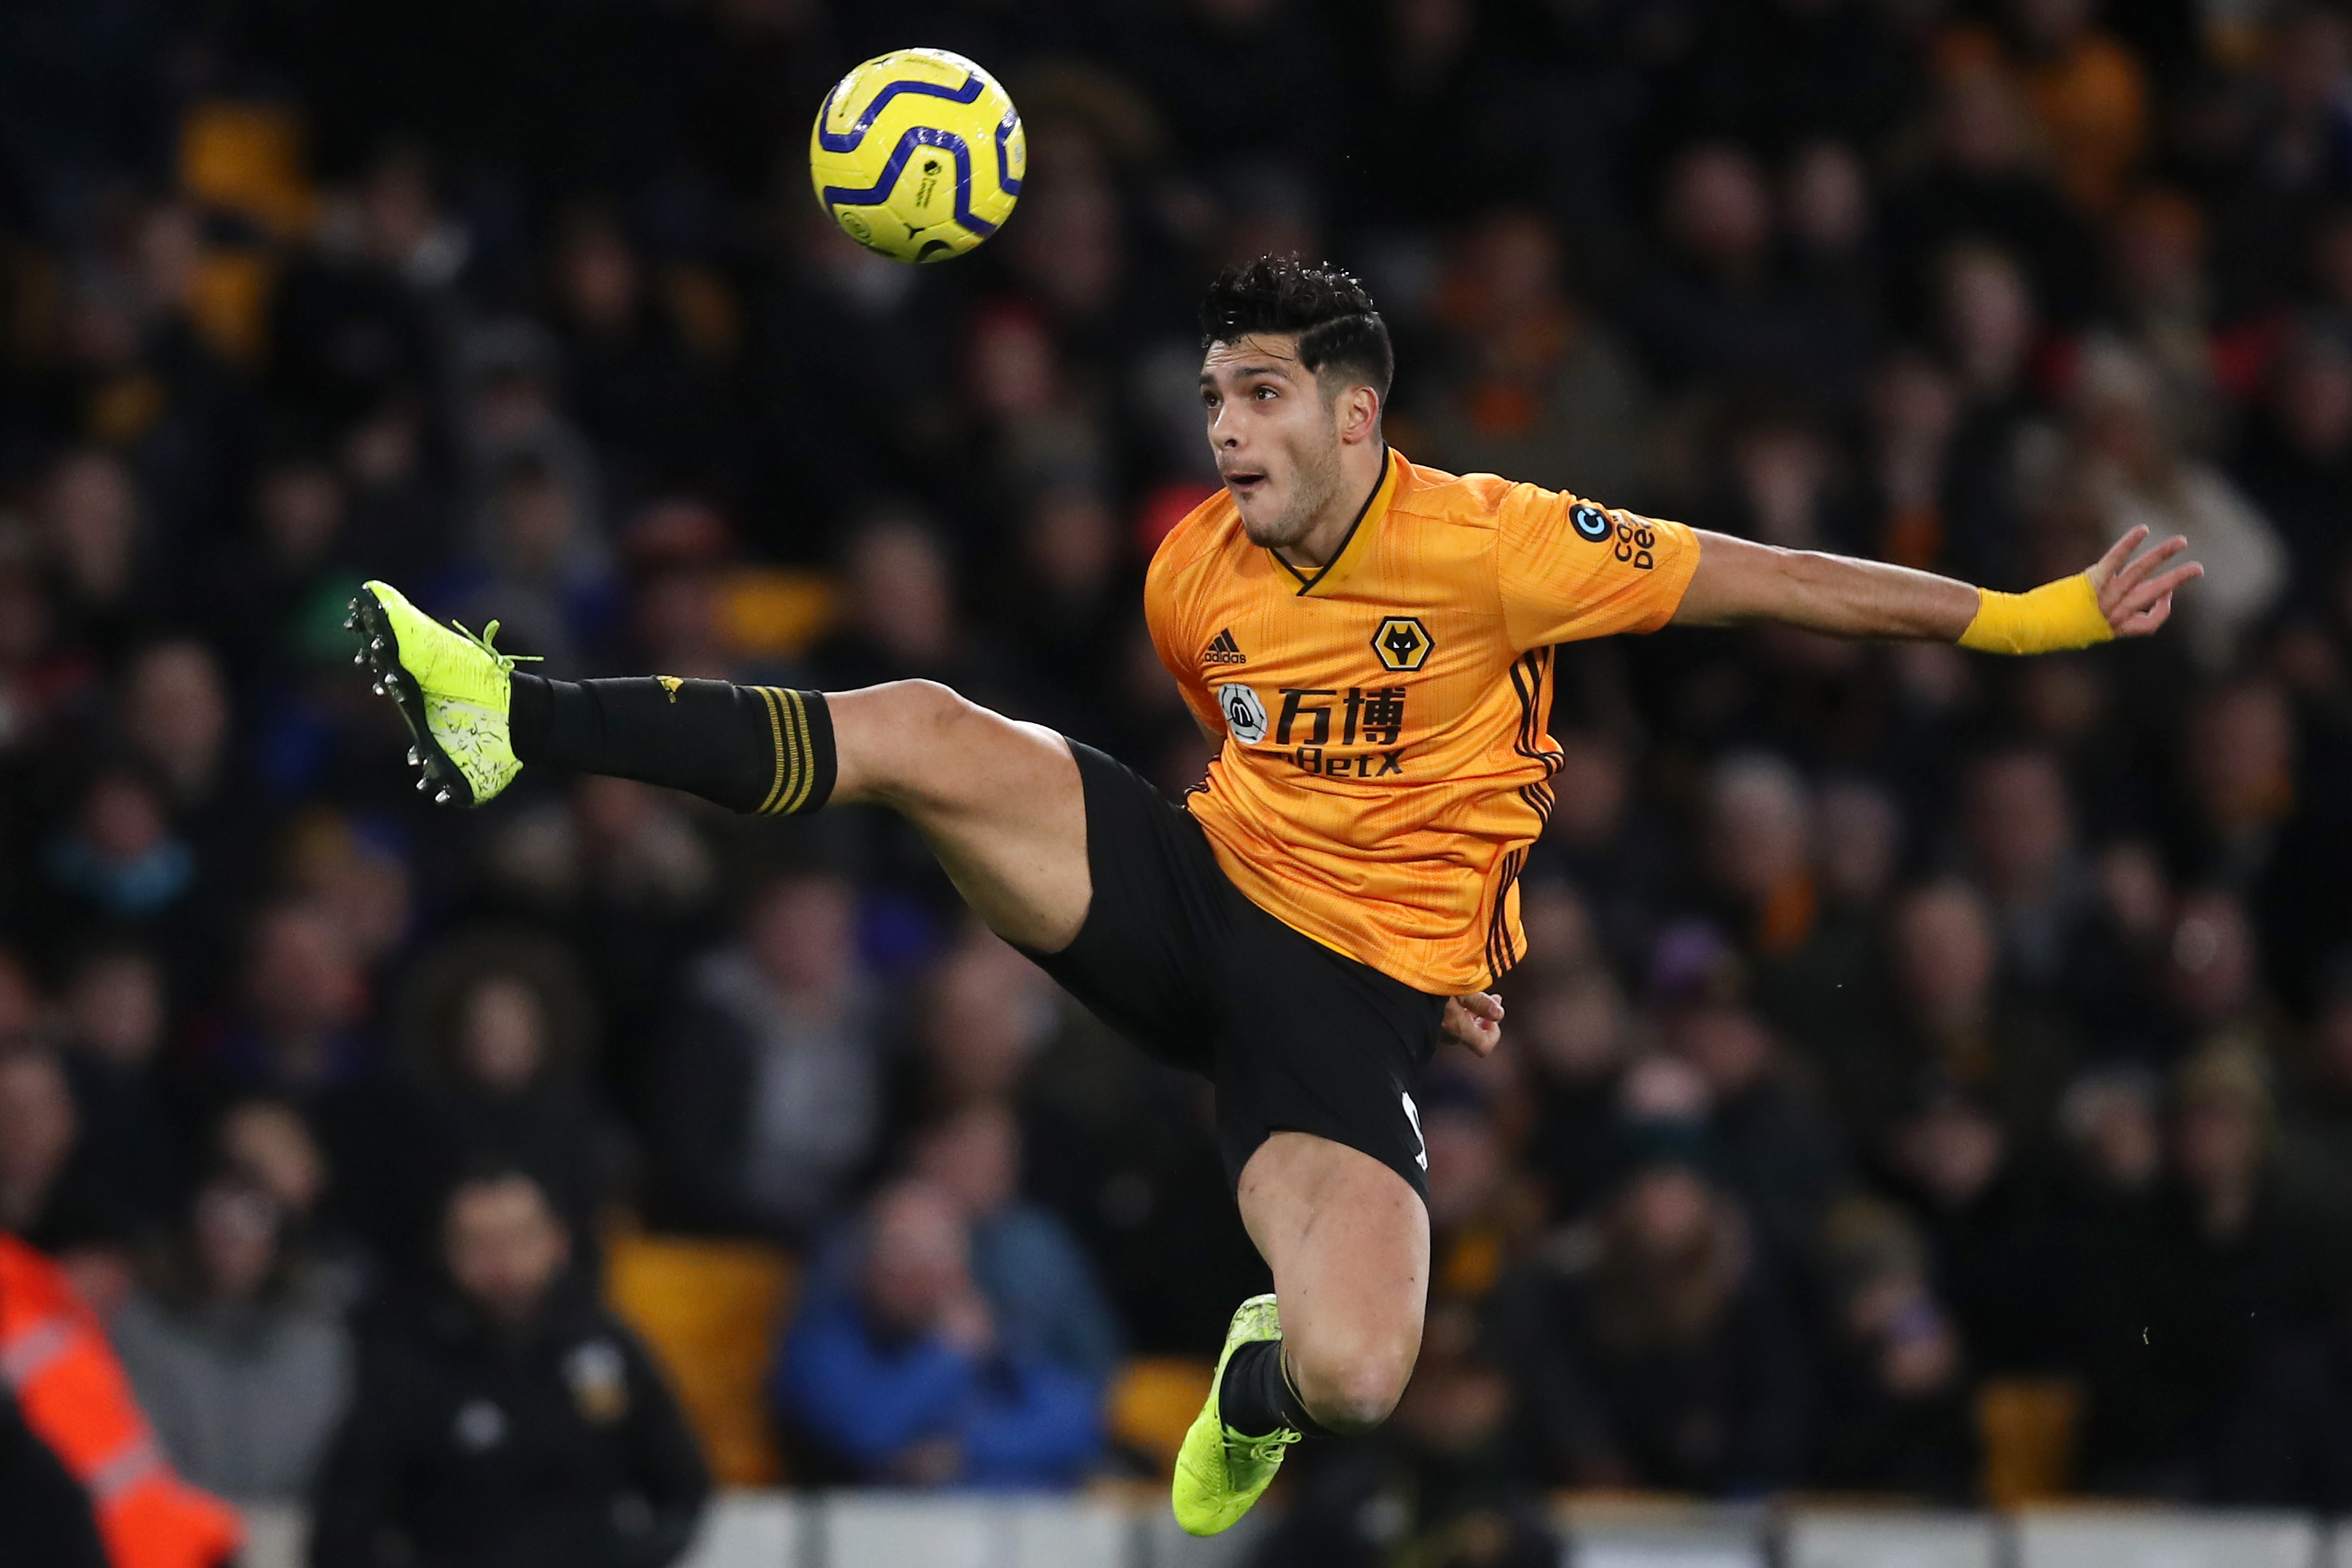 Raul Jimenez is a key man for Wolves. (Photo by Marc Atkins/Getty Images)